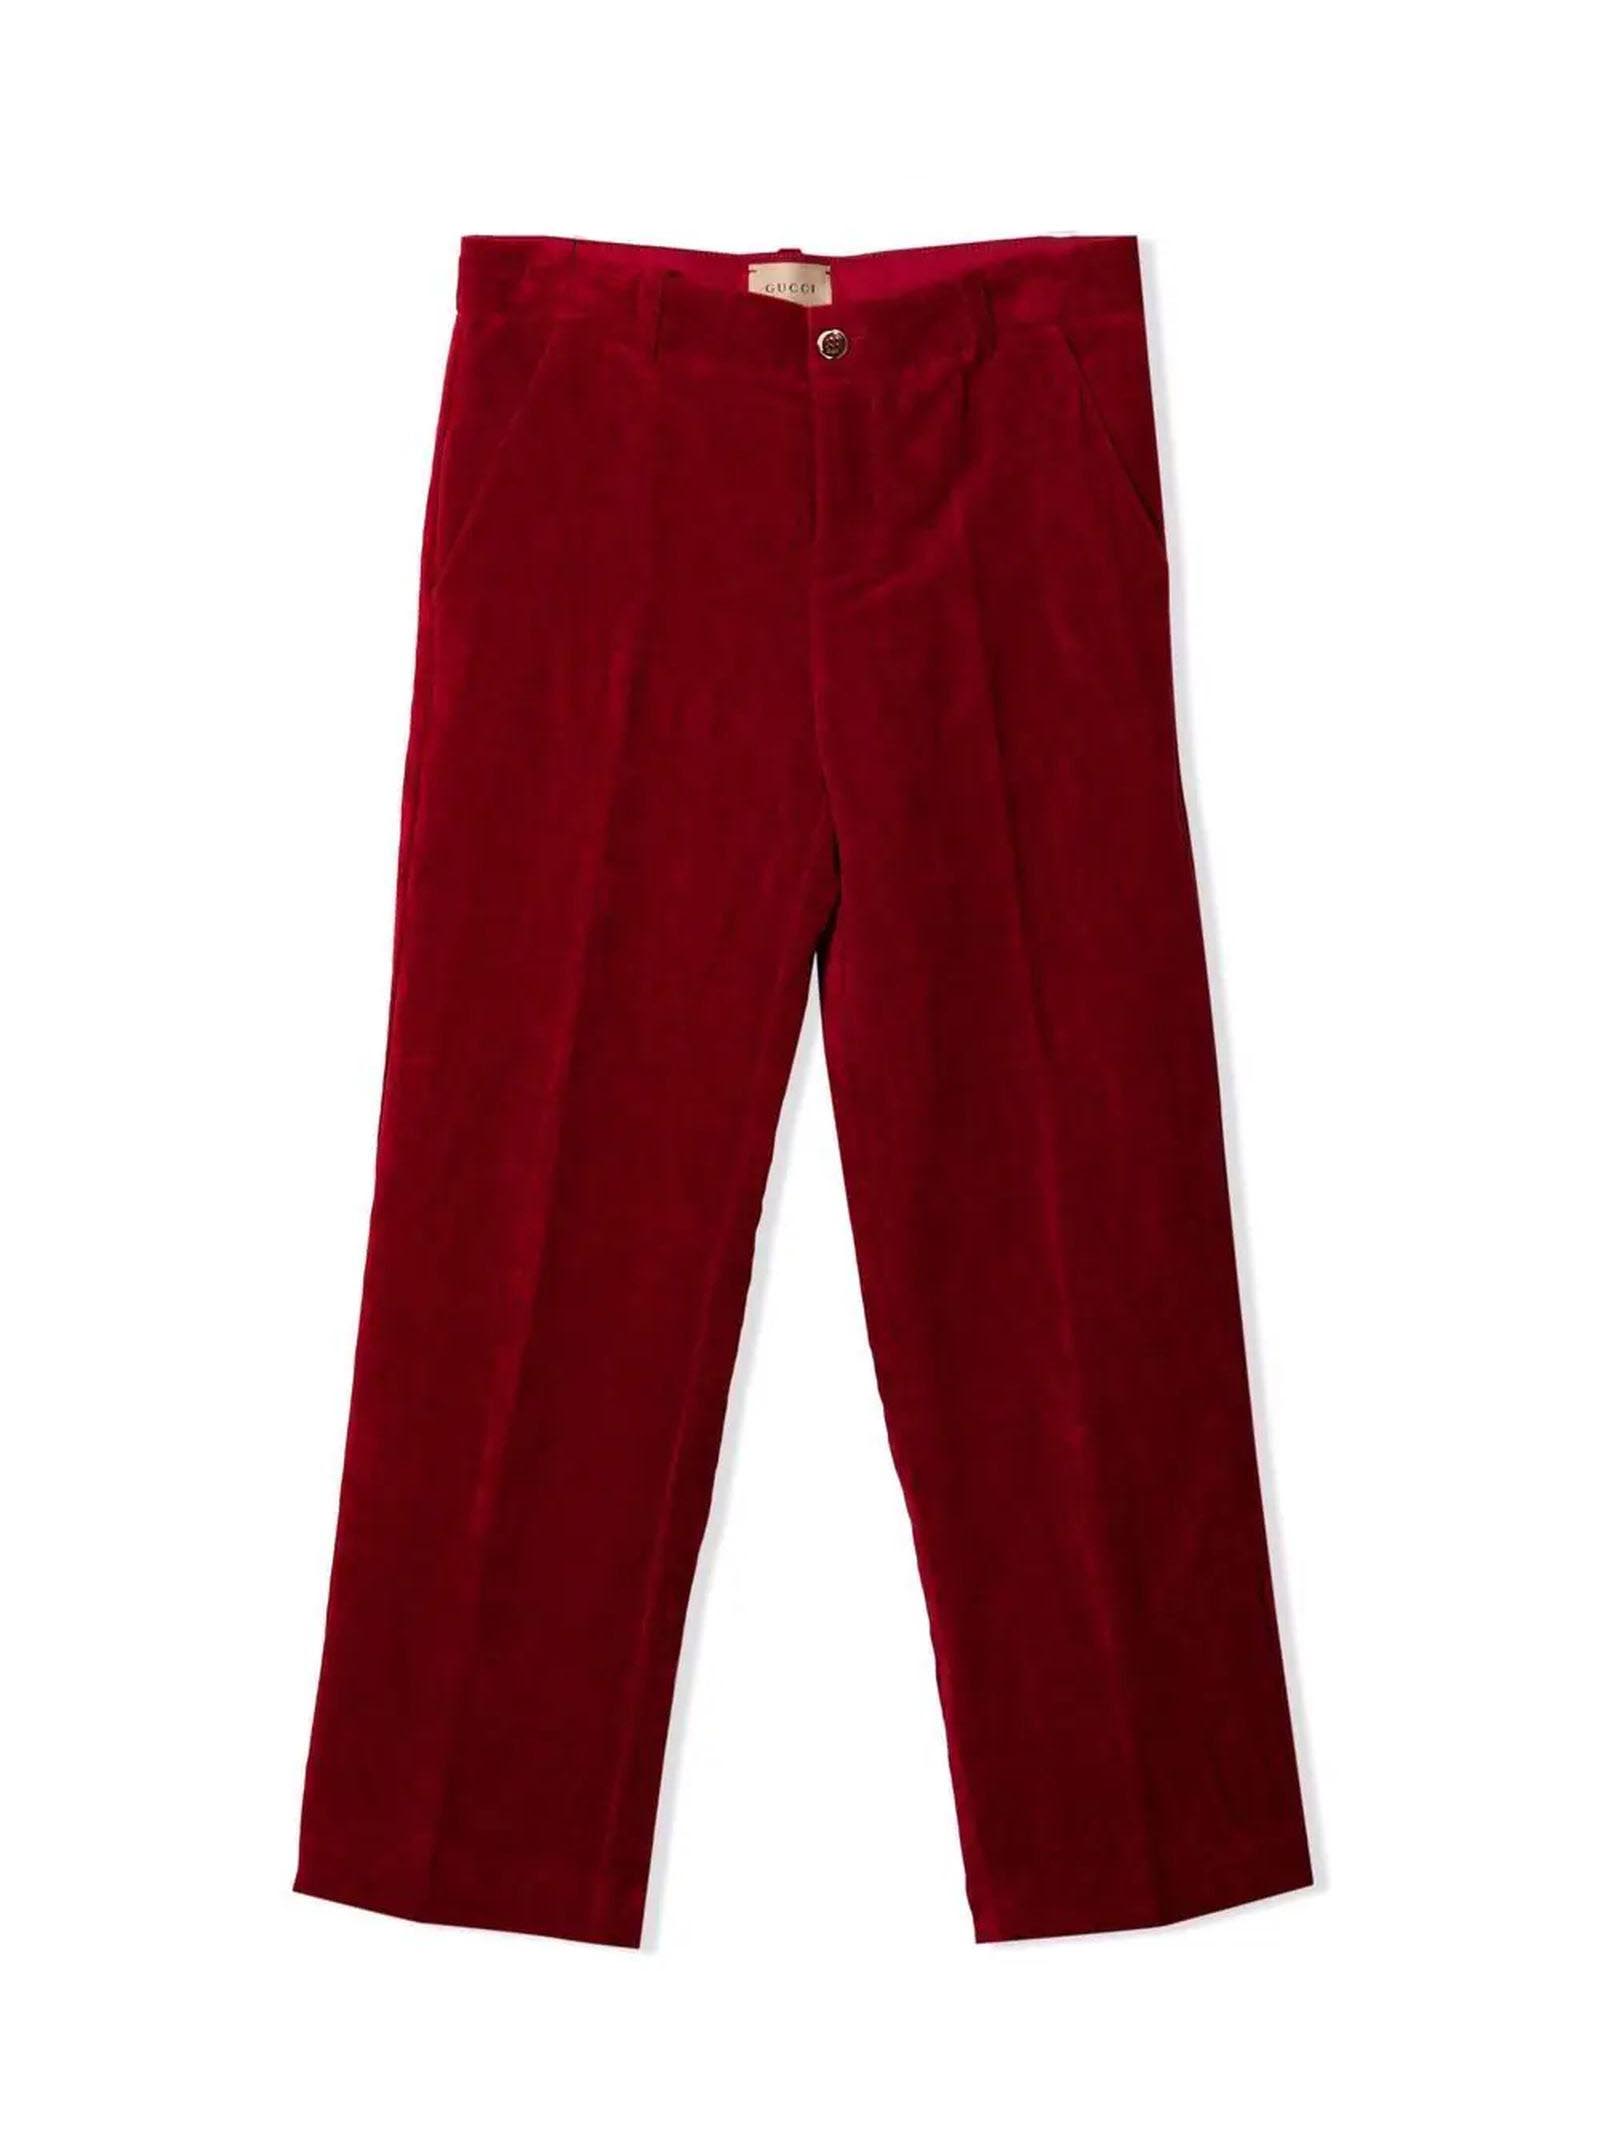 Gucci Cherry-red Cotton-blend Trousers